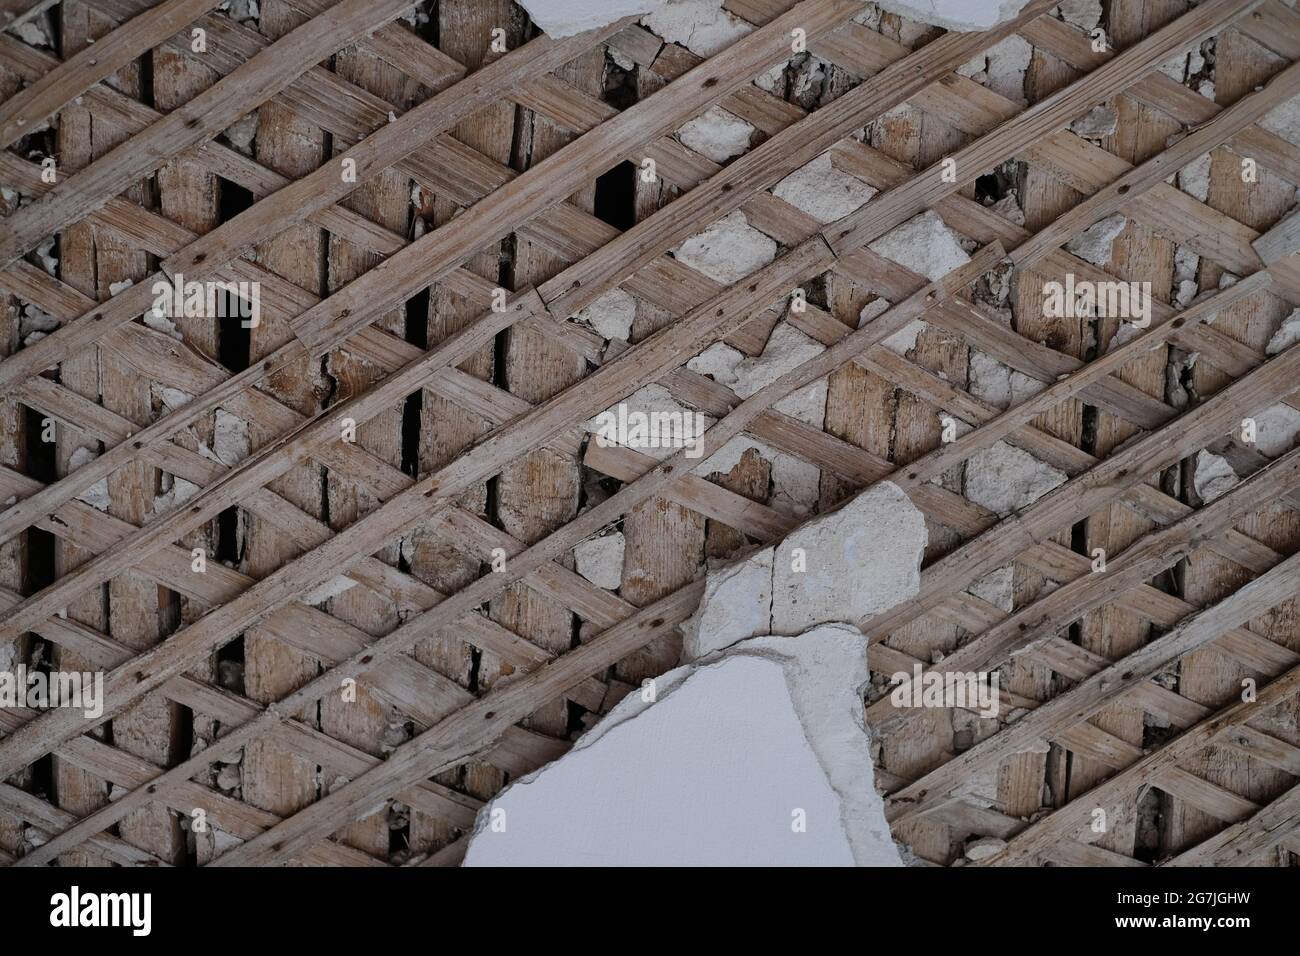 ruined wall with wooden crate and falling plaster Stock Photo